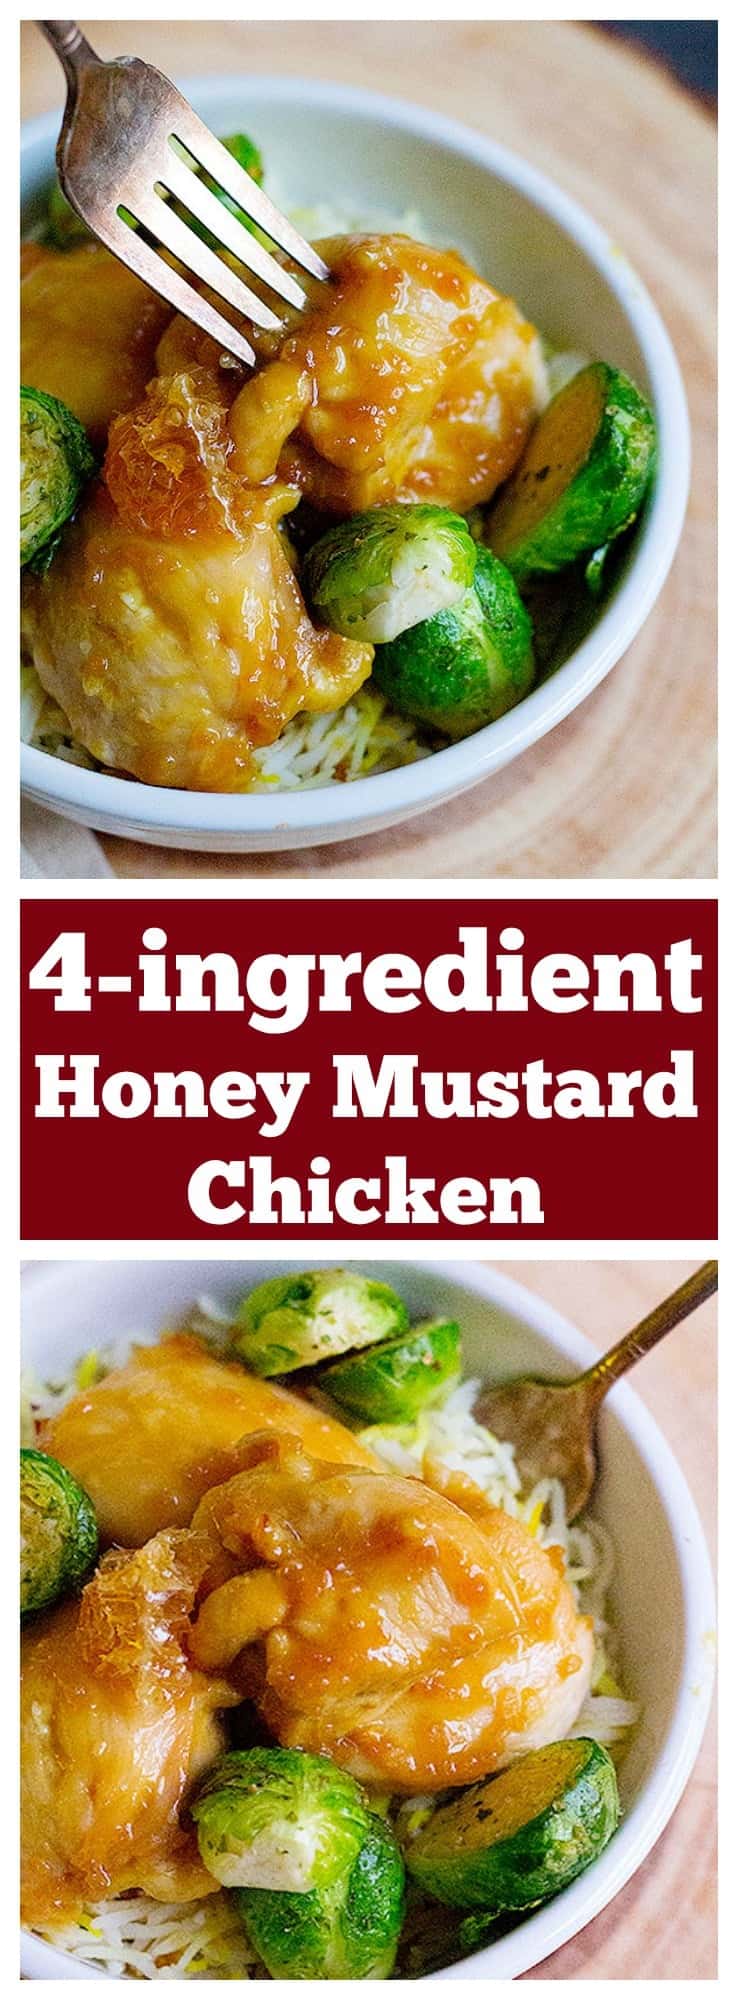 4-ingredient baked honey mustard chicken is so simple to make and much better than take out. Make this all time favorite dish at home.